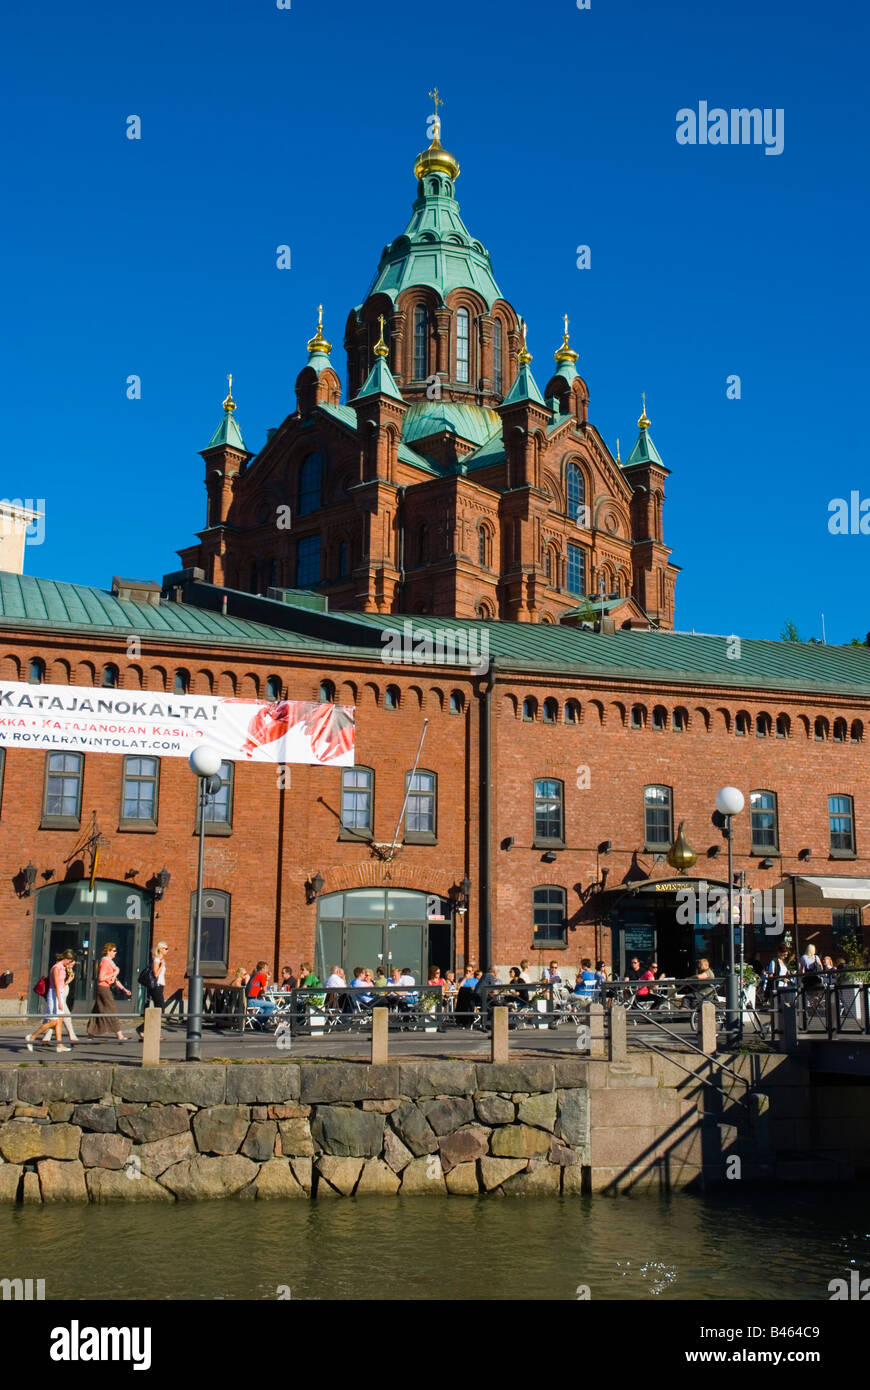 Restaurant terrace in front of Uspensky cathedral in Helsinki Finland Europe Stock Photo